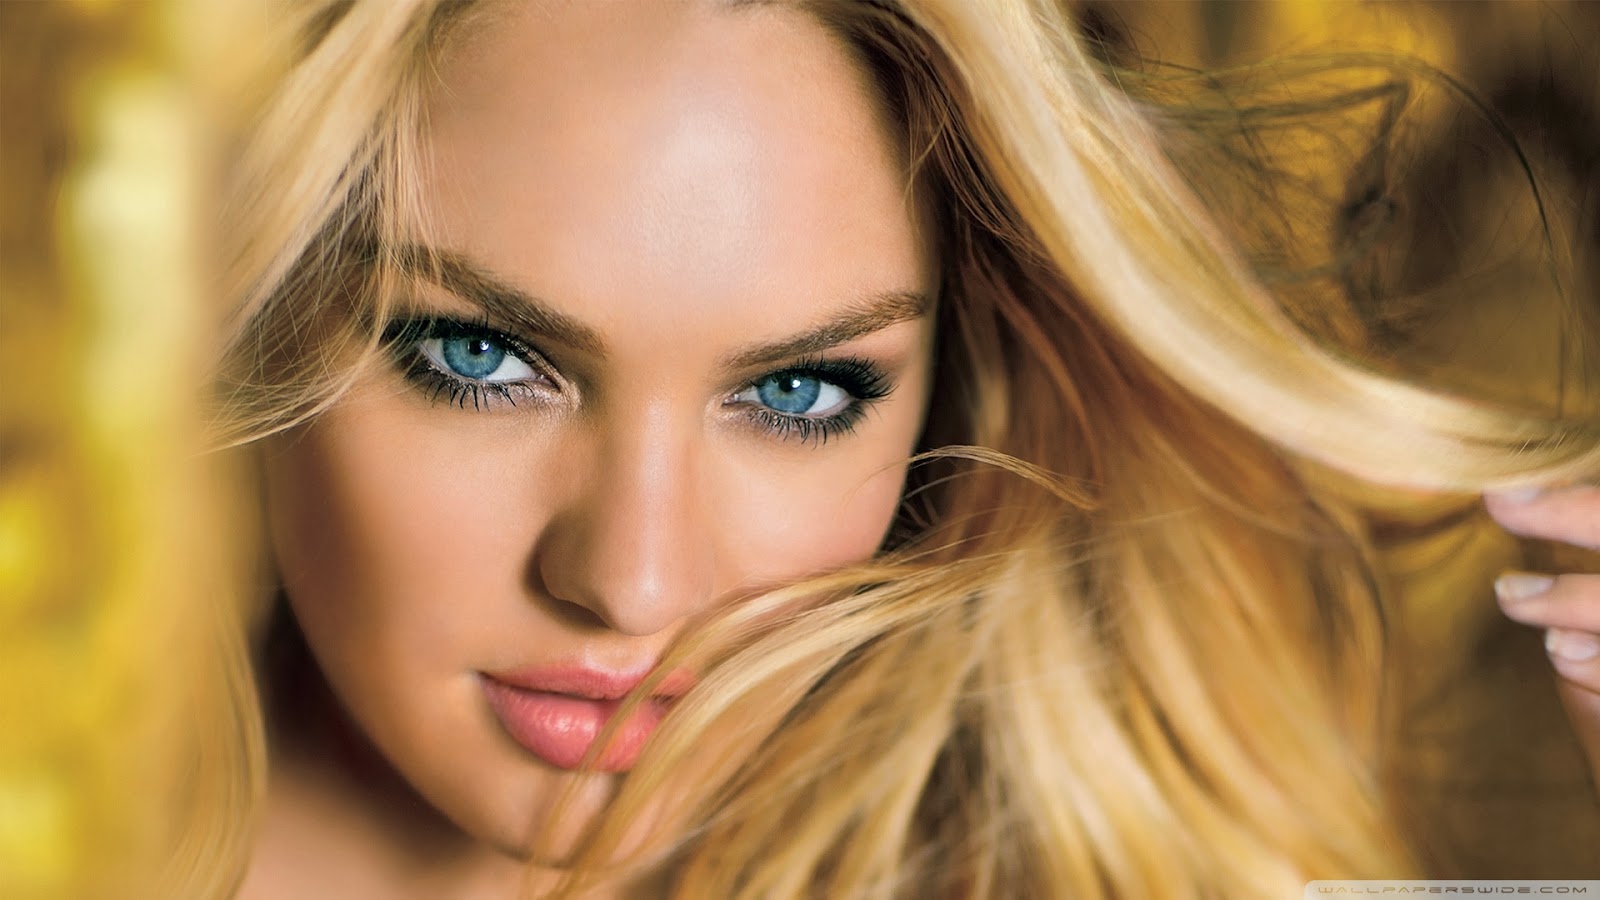 Candice Swanepoel Hot HD Wallpapers   HD Wallpapers Blog